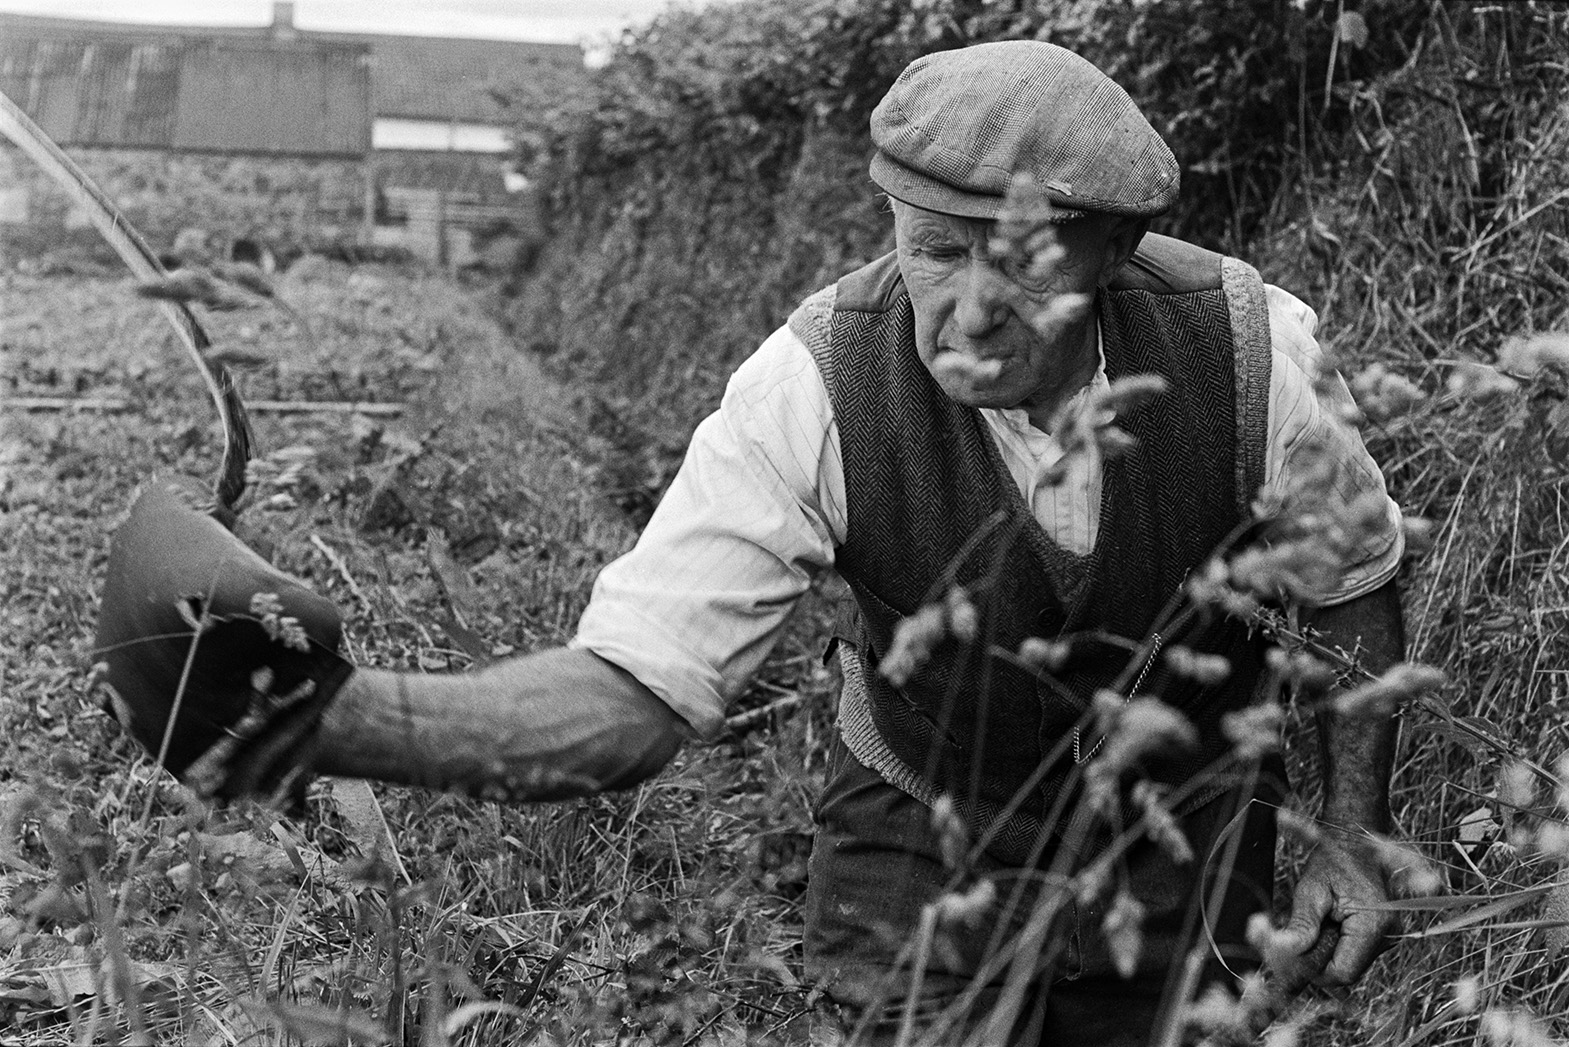 Tom Hooper using a sickle to trim hedgerows to prevent weeds spreading to a potato crop in a field at Mill Road Farm, Beaford. Farm buildings can be seen in the background. The farm was also known as Jeffrys.